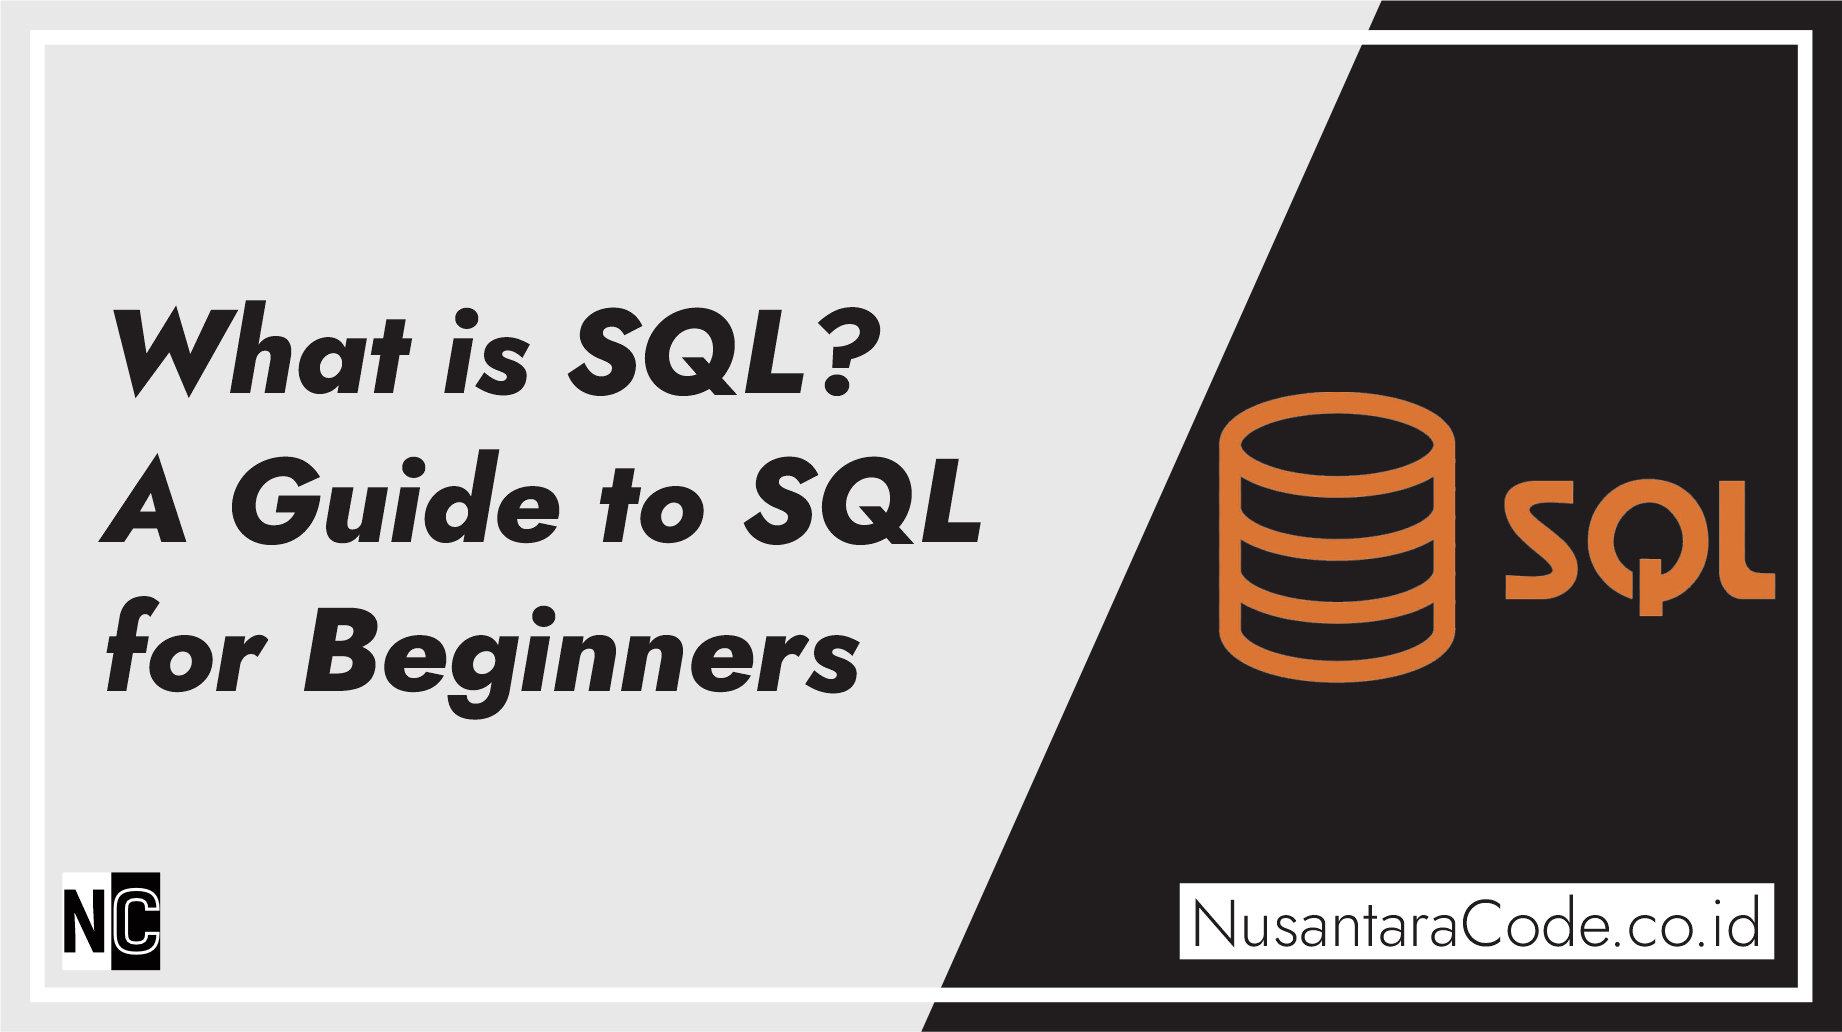 What is SQL? A Guide to SQL for Beginners